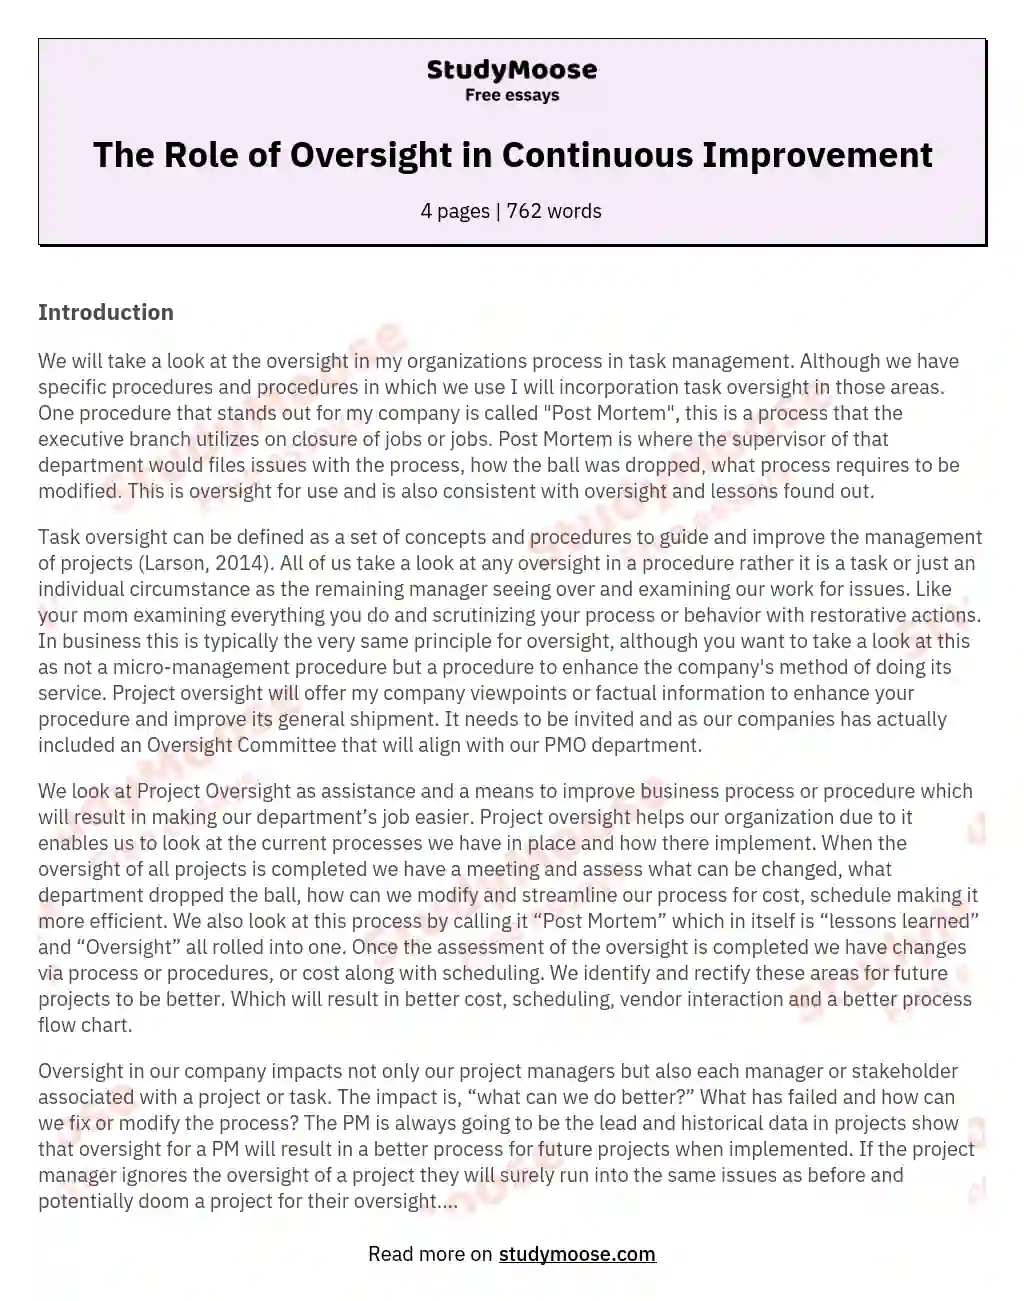 The Role of Oversight in Continuous Improvement essay